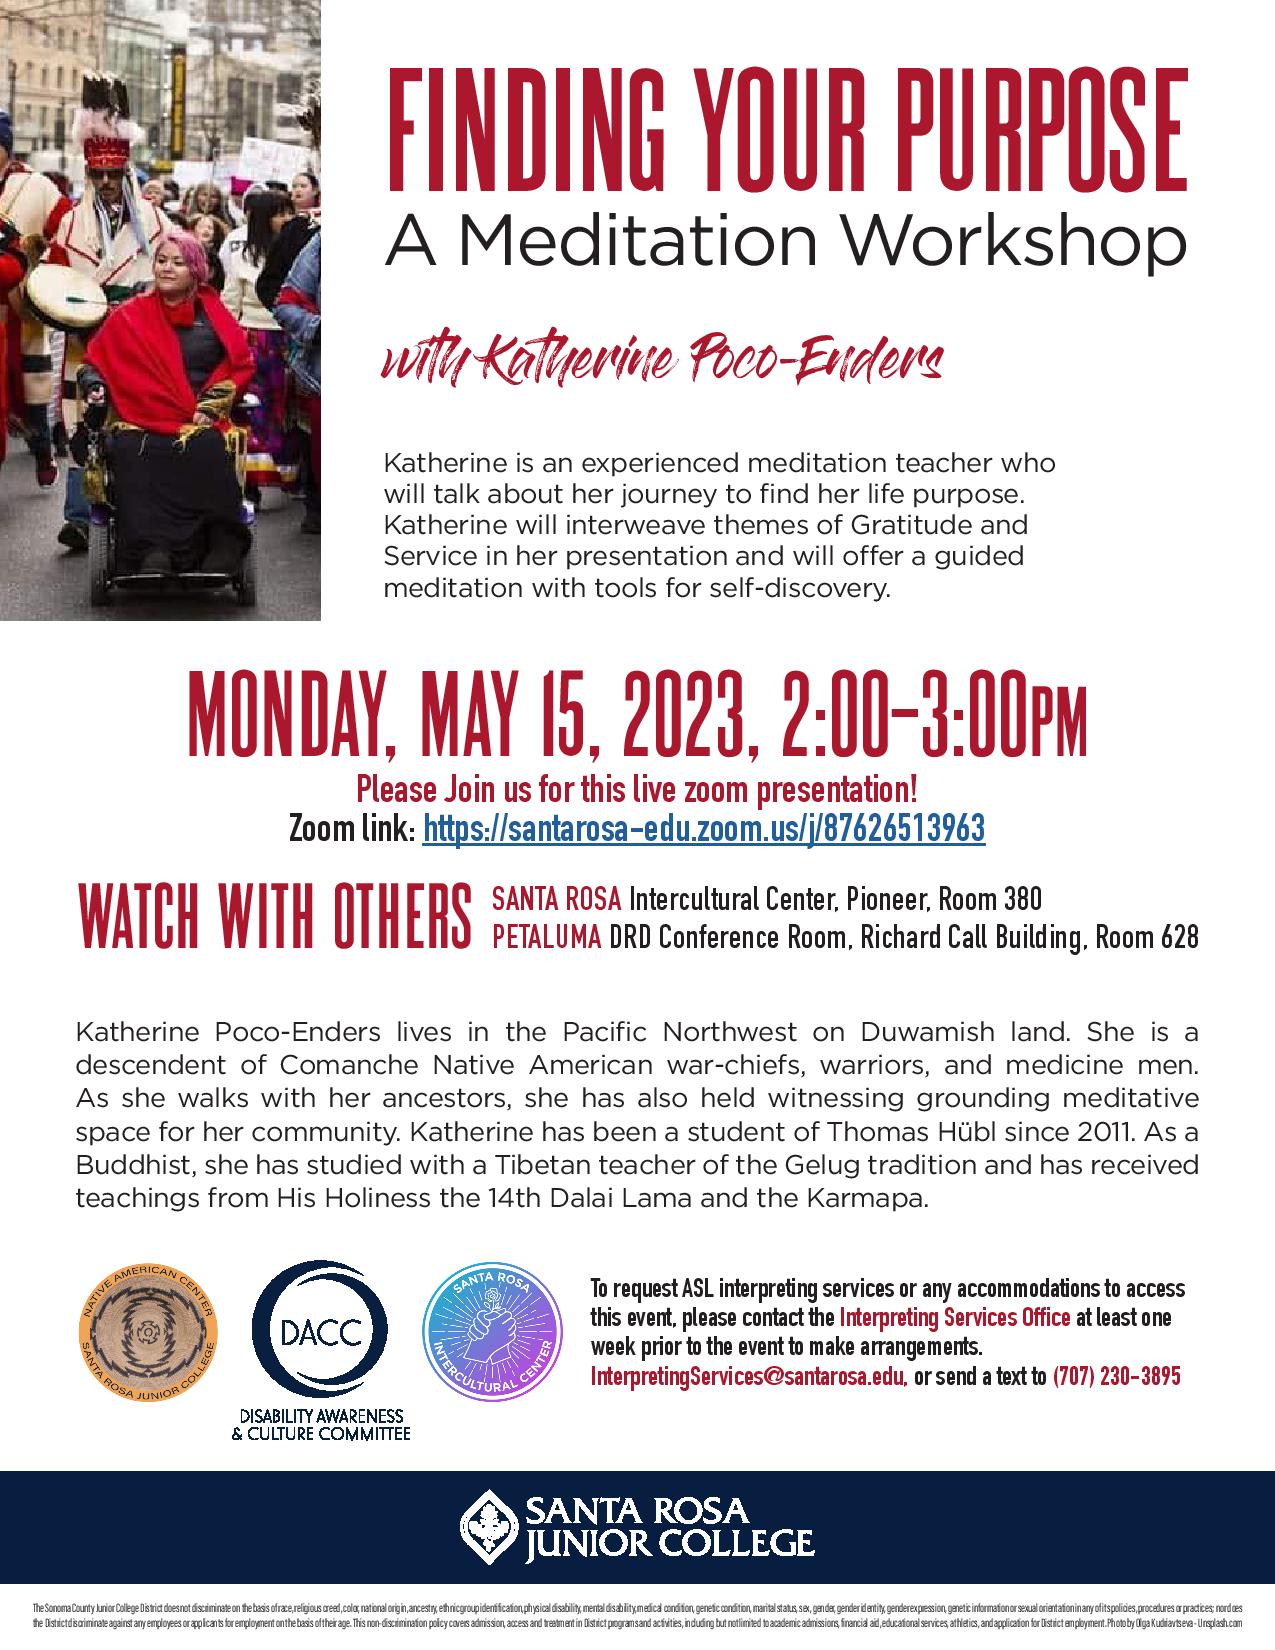 FINDING YOUR PURPOSE A Meditation Workshop with Katherine Poco-Enders Katherine is an experienced meditation teacher who will talk about her journey to find her life purpose. Katherine will interweave themes of Gratitude and Service in her presentation and will offer a guided meditation with tools for self-discovery. Monday, May 15, 2023, 2:00–3:00PM Please Join us for this live zoom presentation! Zoom link: https://santarosa-edu.zoom.us/j/87626513963 SANTA ROSA Intercultural Center, Pioneer, Room 380 PETALUMA DRD Conference Room, Richard Call Building, Room 628 Katherine Poco-Enders lives in the Pacific Northwest on Duwamish land. She is a descendent of Comanche Native American war-chiefs, warriors, and medicine men. As she walks with her ancestors, she has also held witnessing grounding meditative space for her community. Katherine has been a student of Thomas Hübl since 2011. As a Buddhist, she has studied with a Tibetan teacher of the Gelug tradition and has received teachings from His Holiness the 14th Dalai Lama and the Karmapa. To request ASL interpreting services or any accommodations to access this event, please contact the Interpreting Services Office at least one week prior to the event to make arrangements. InterpretingServices@santarosa.edu, or send a text to (707) 230-3895